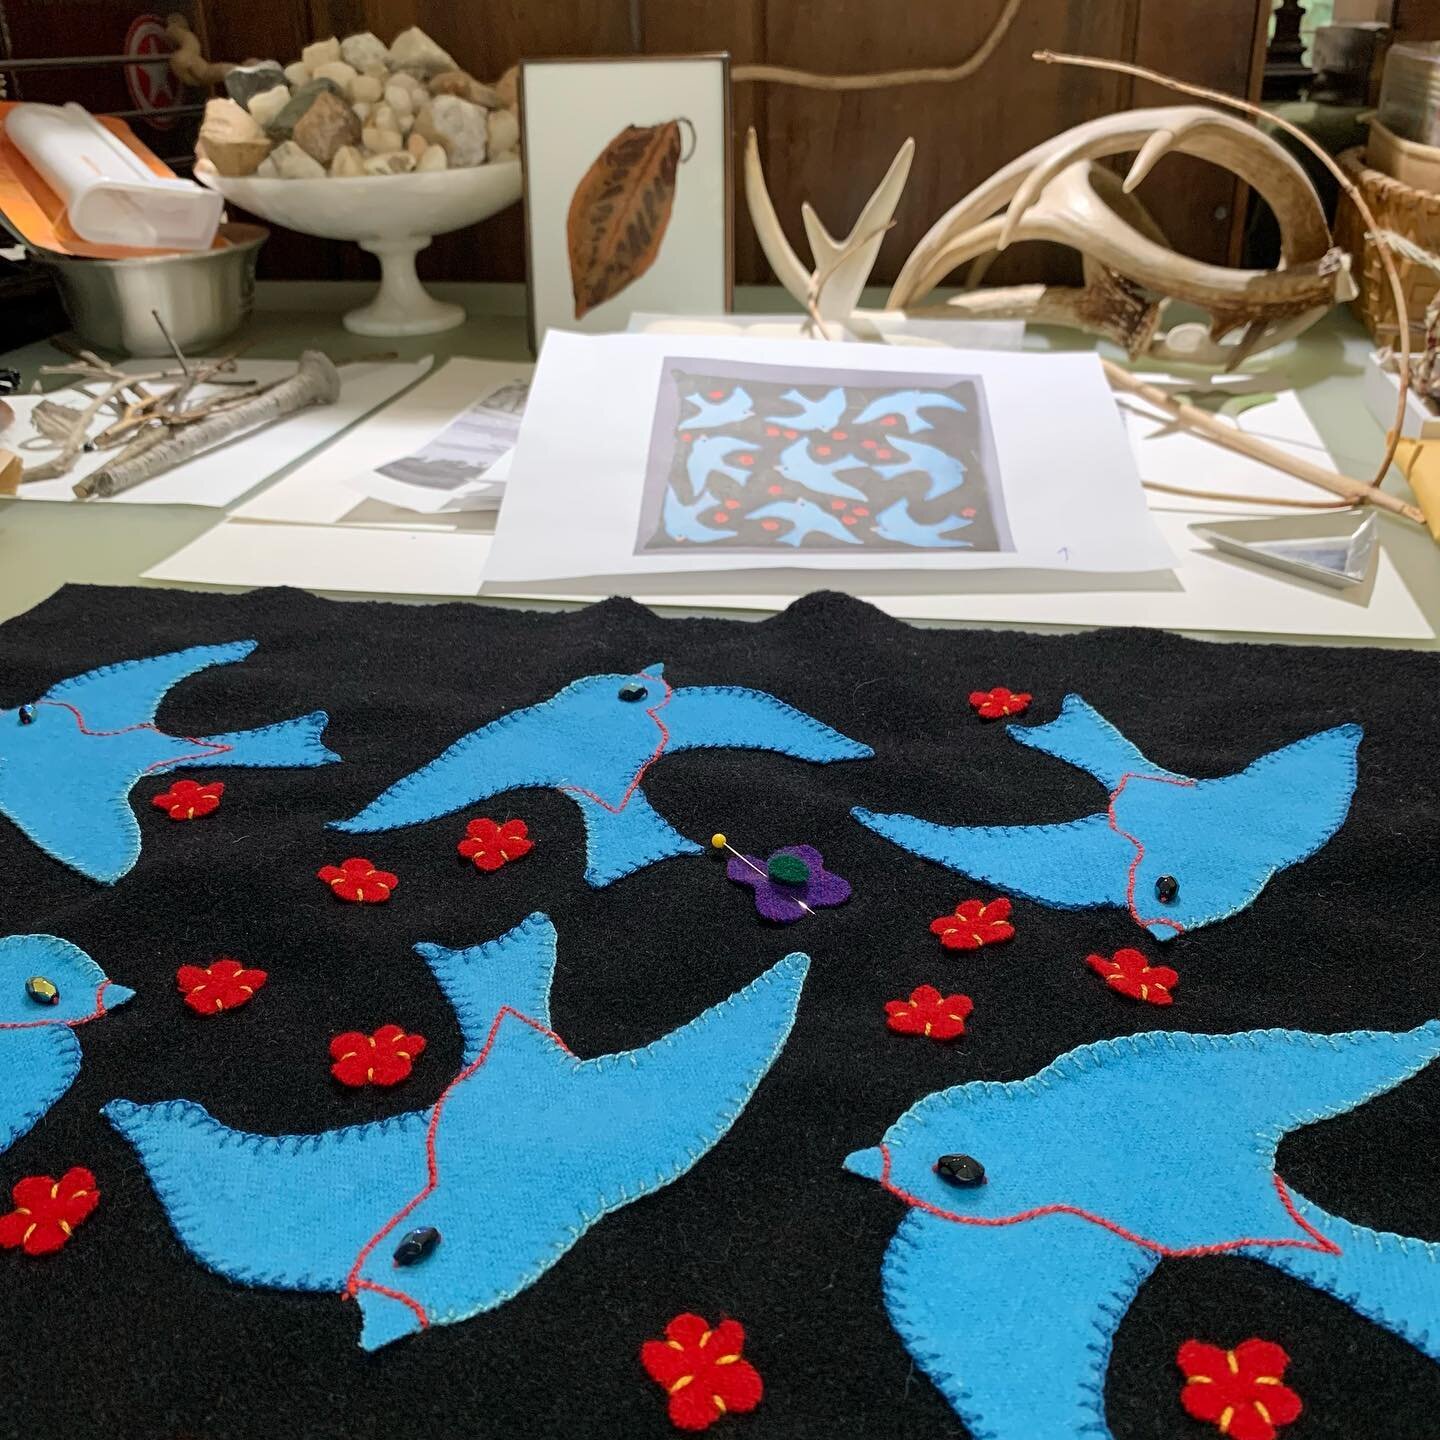 On my desk this morning. Finishing a thank you gift for a special friend.
I&rsquo;ll be teaching this technique in a Penny Rug workshop @snowfarm September 22-25 2022.
Just one spot left! Hope you can join us! 
Sign up @ snowfarm.org
.
.
.
.
.
#thank